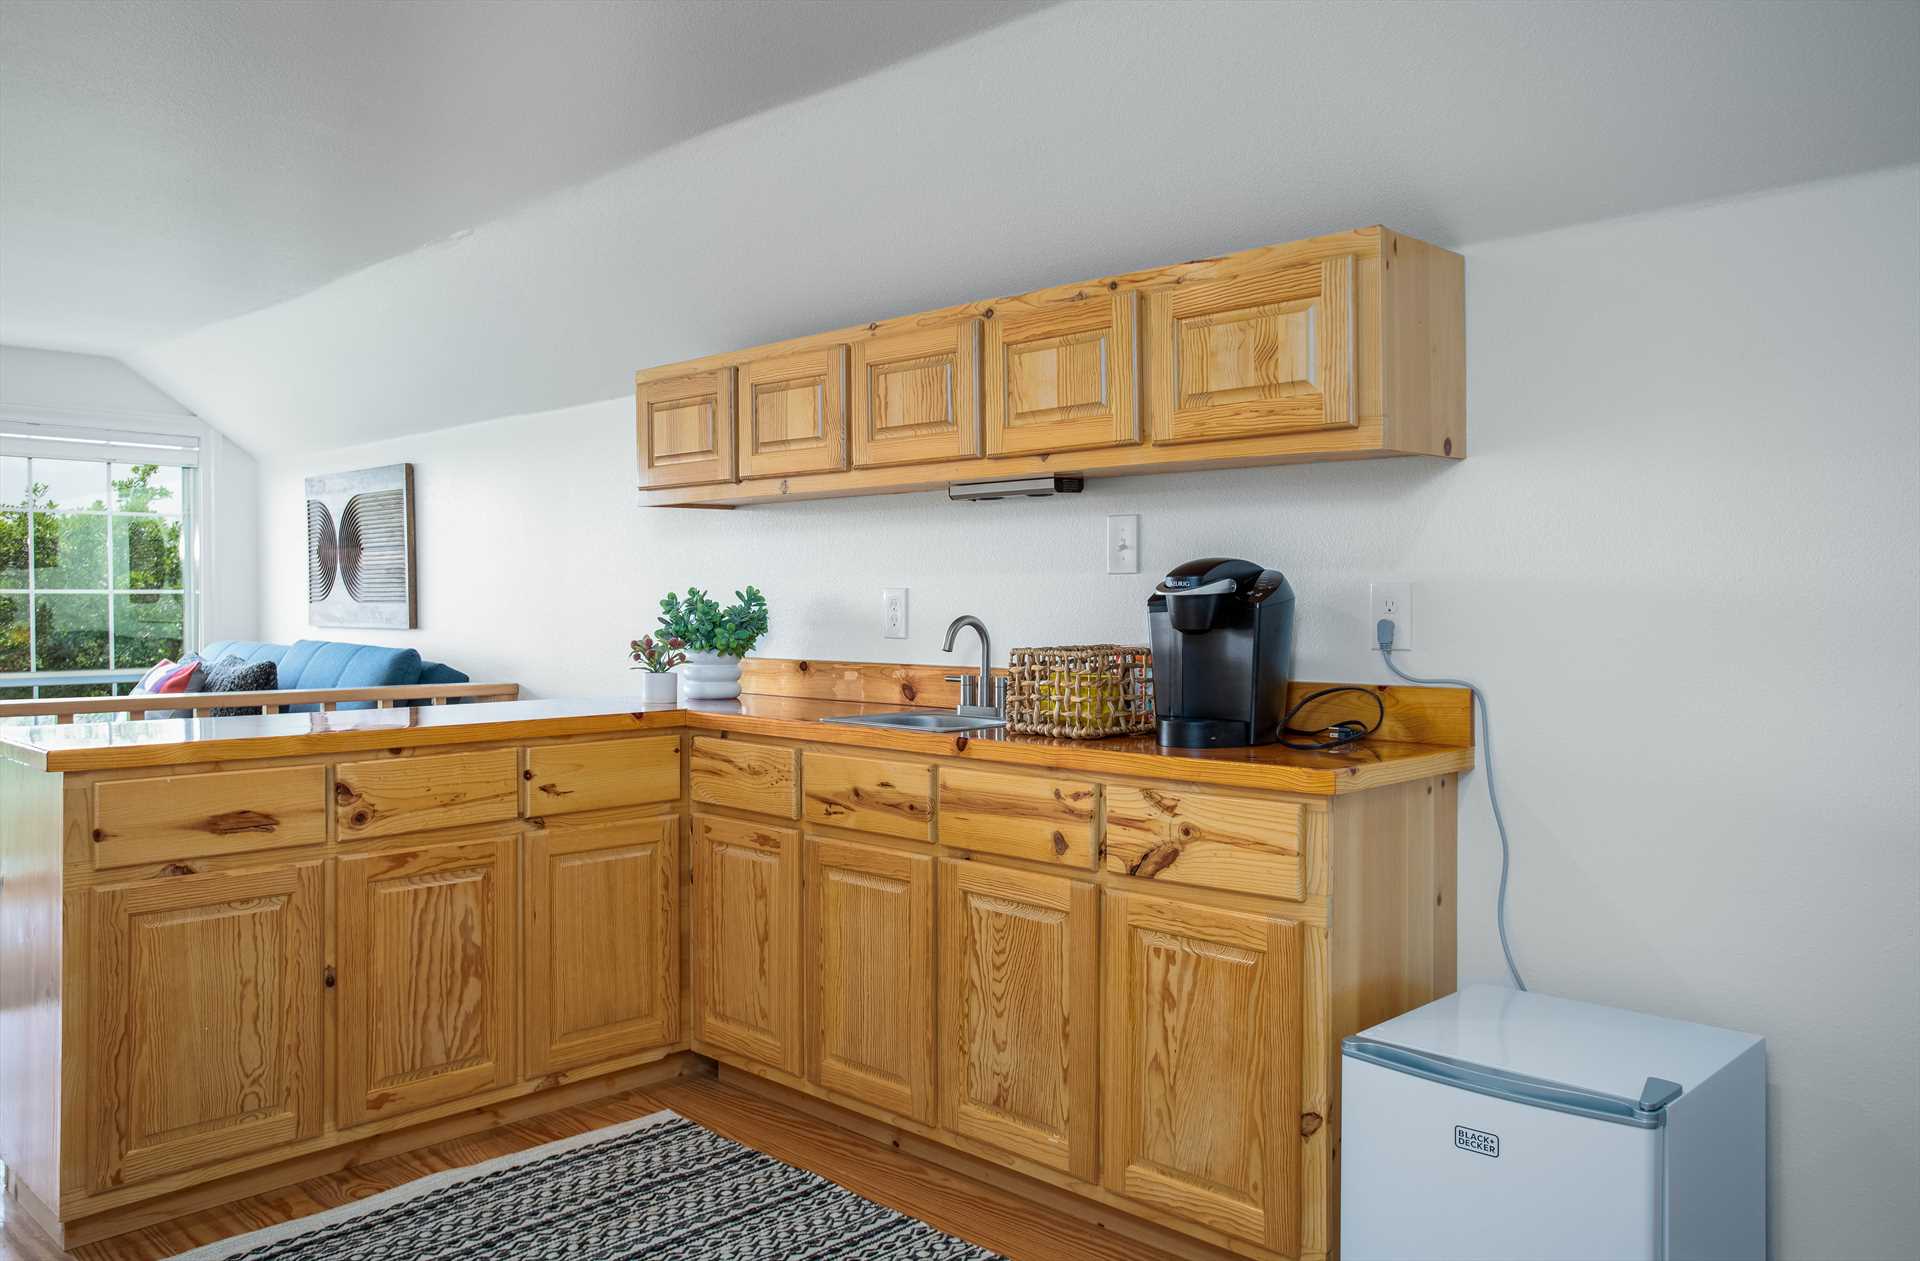                                                 The optional added suite accommodates up to four additional people, and includes a cozy and convenient kitchenette!